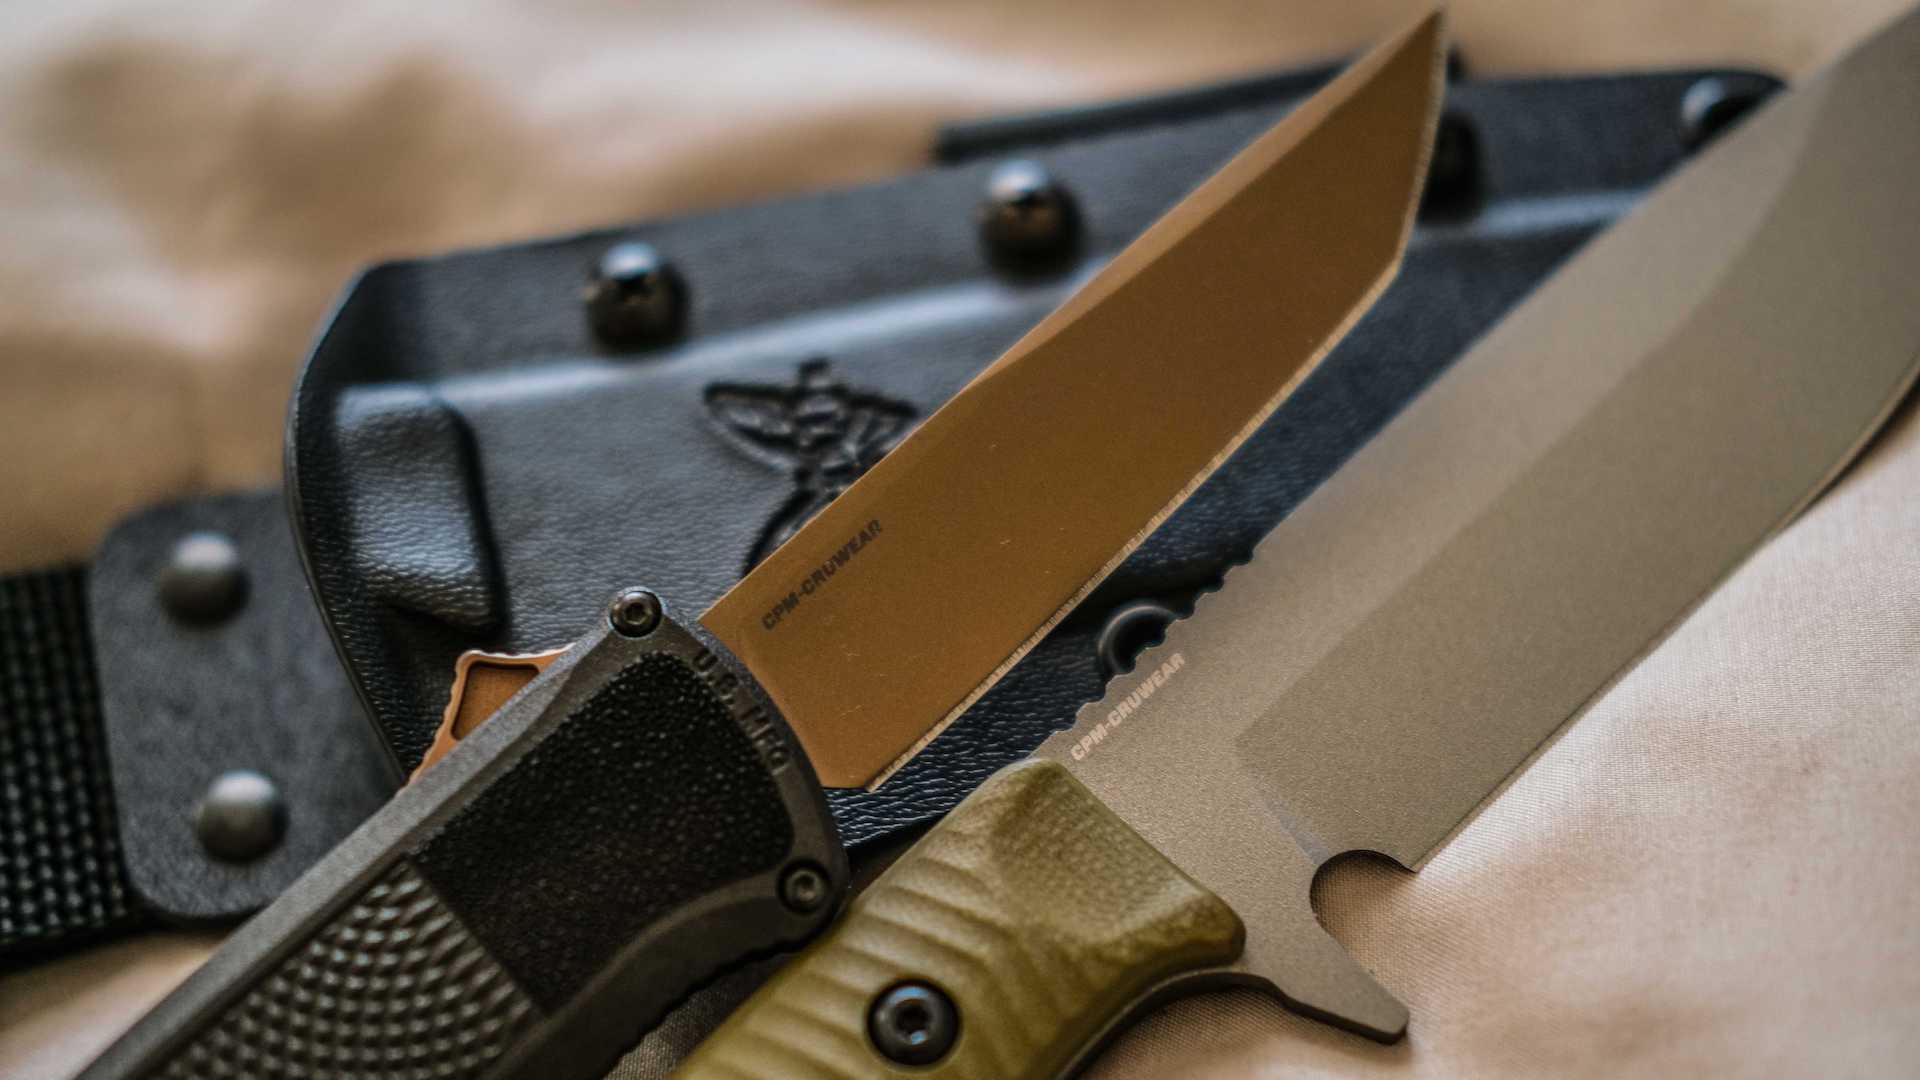 Hands-on with Benchmade’s triple threat of new tactical knives